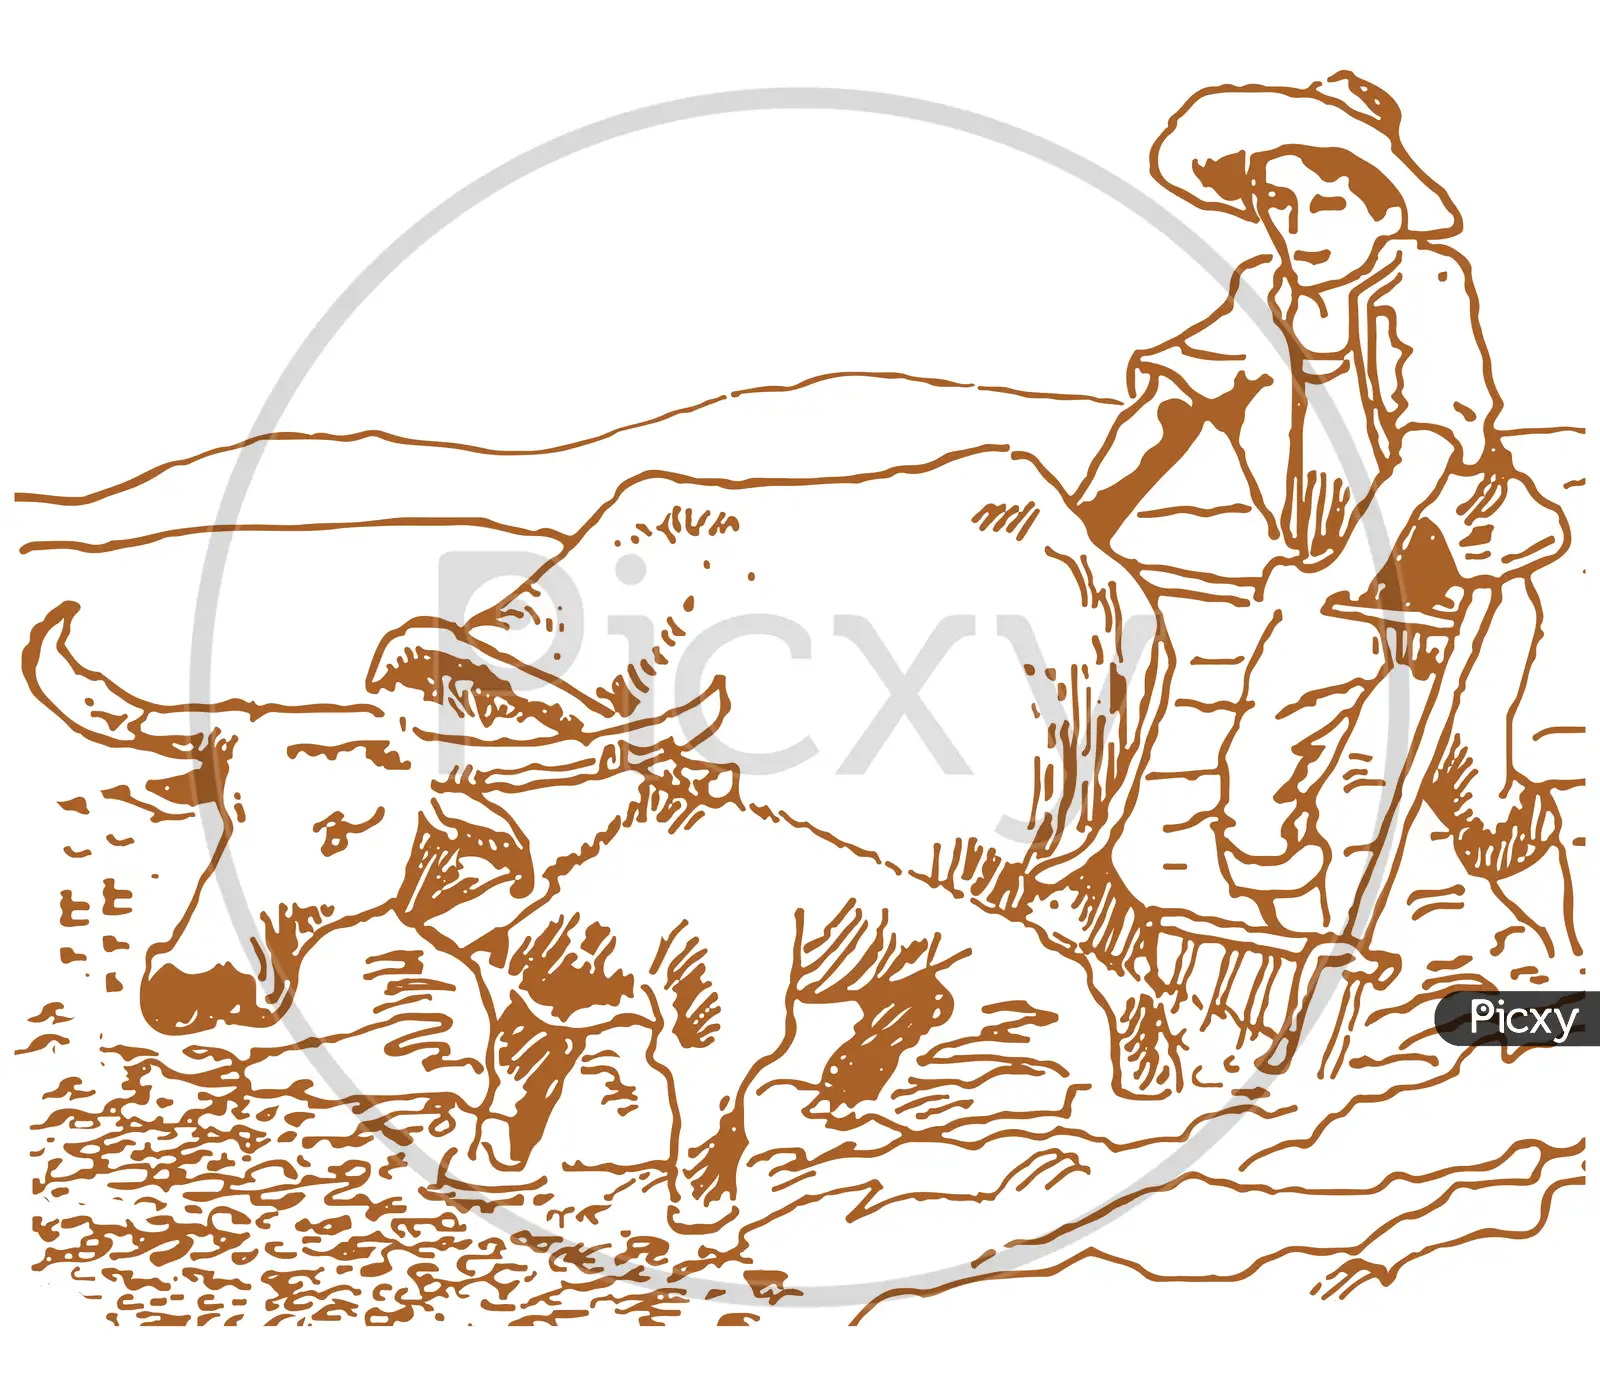 Farmer drawing Black and White Stock Photos & Images - Alamy